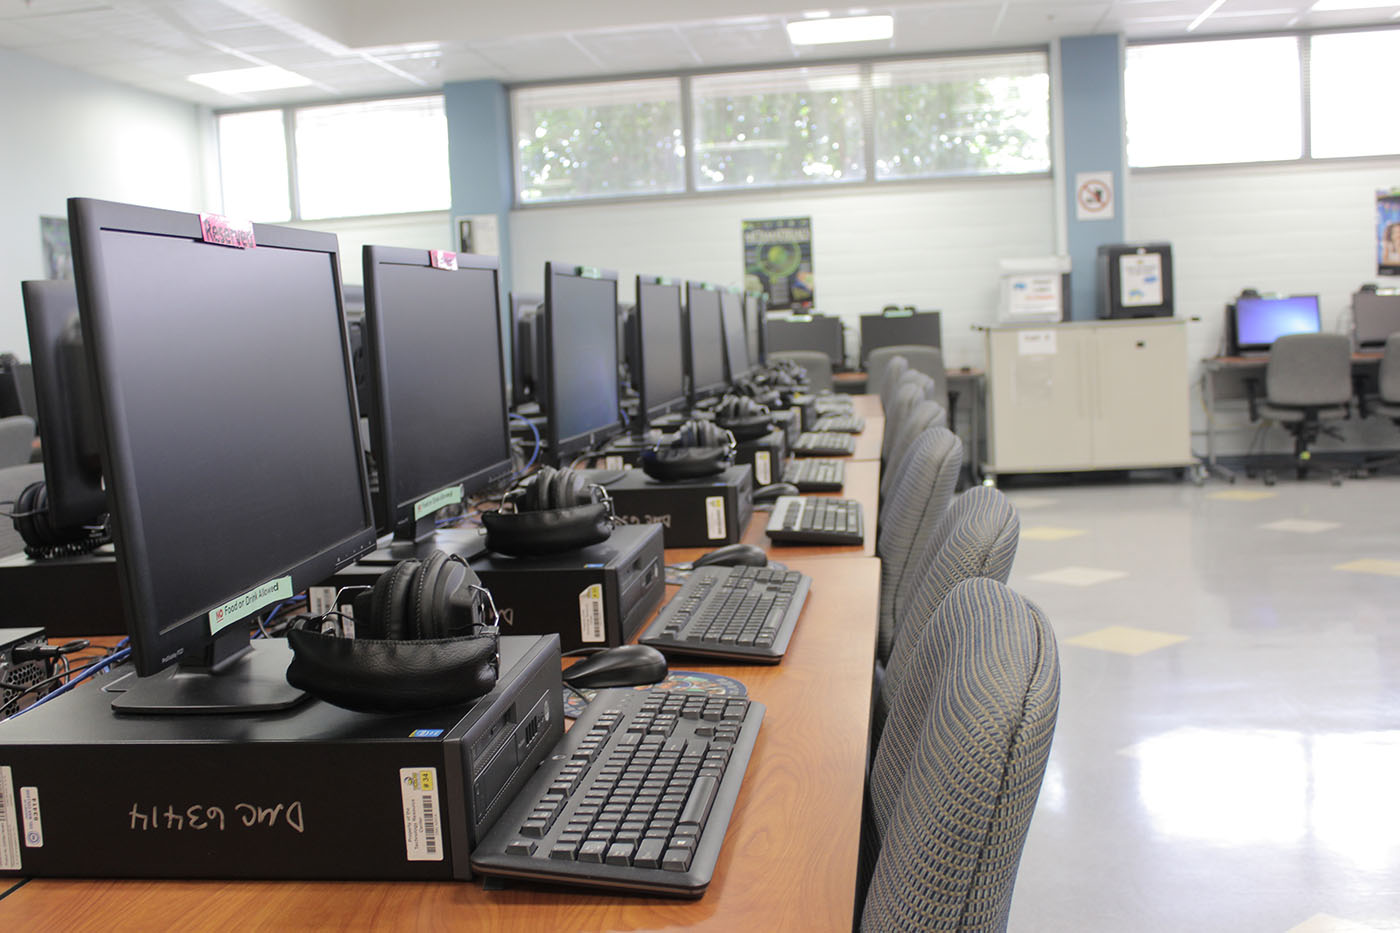 A row of Windows PCs in the TRC